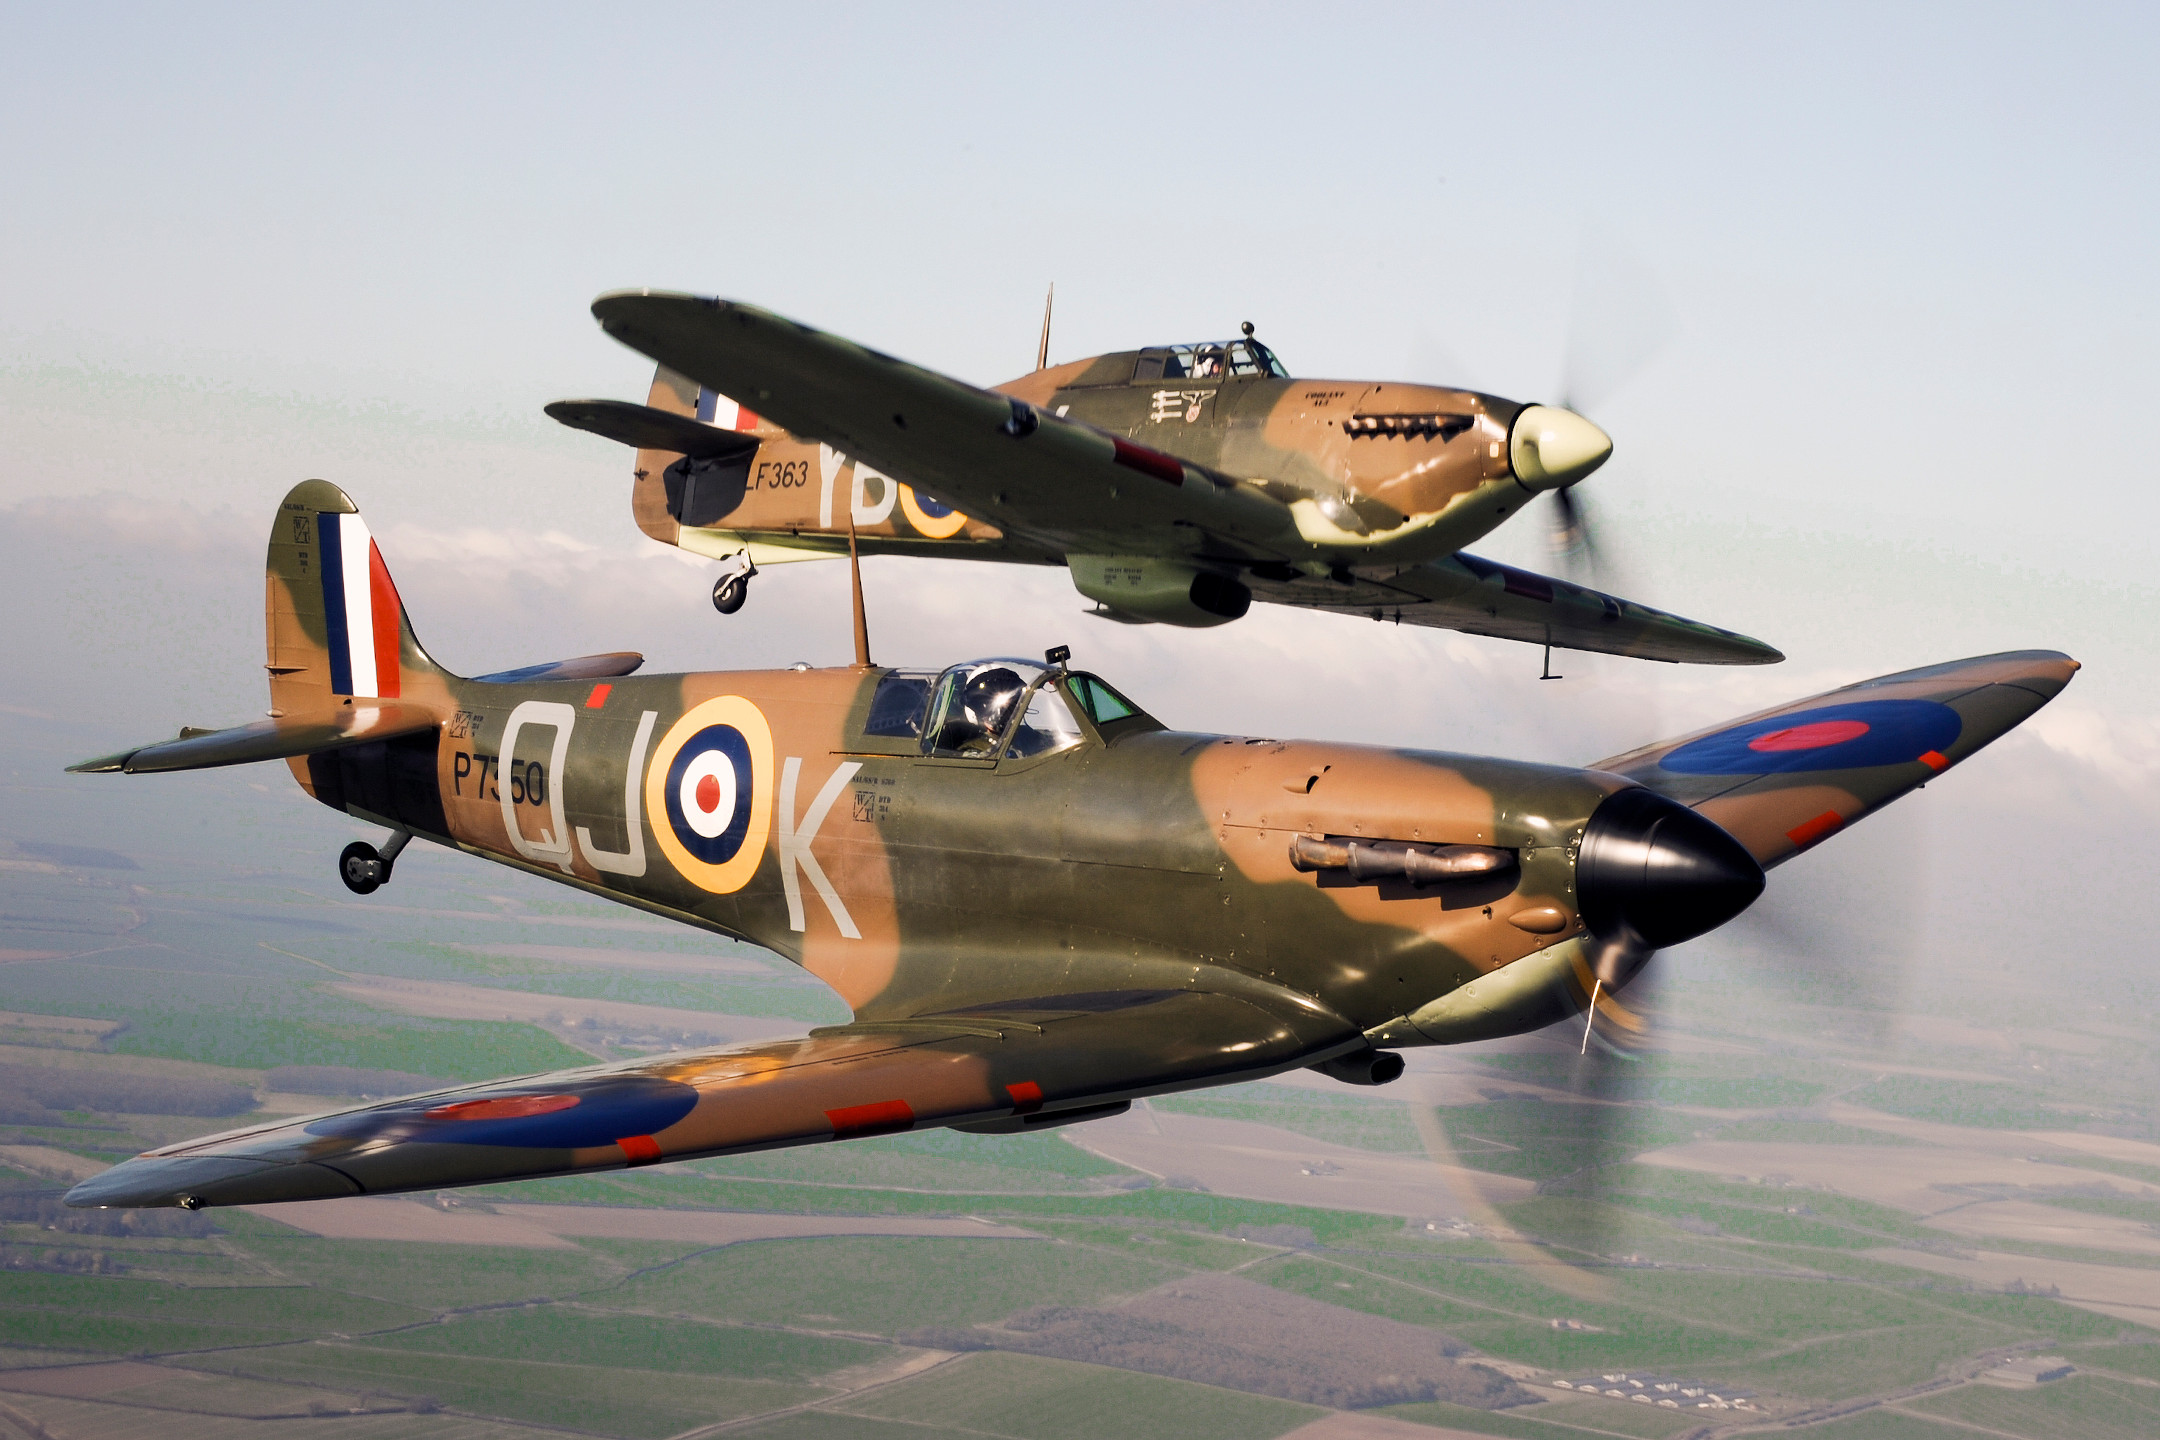 Spitfire MkIX replacement menu wallpaper and music - updated directory 03172022